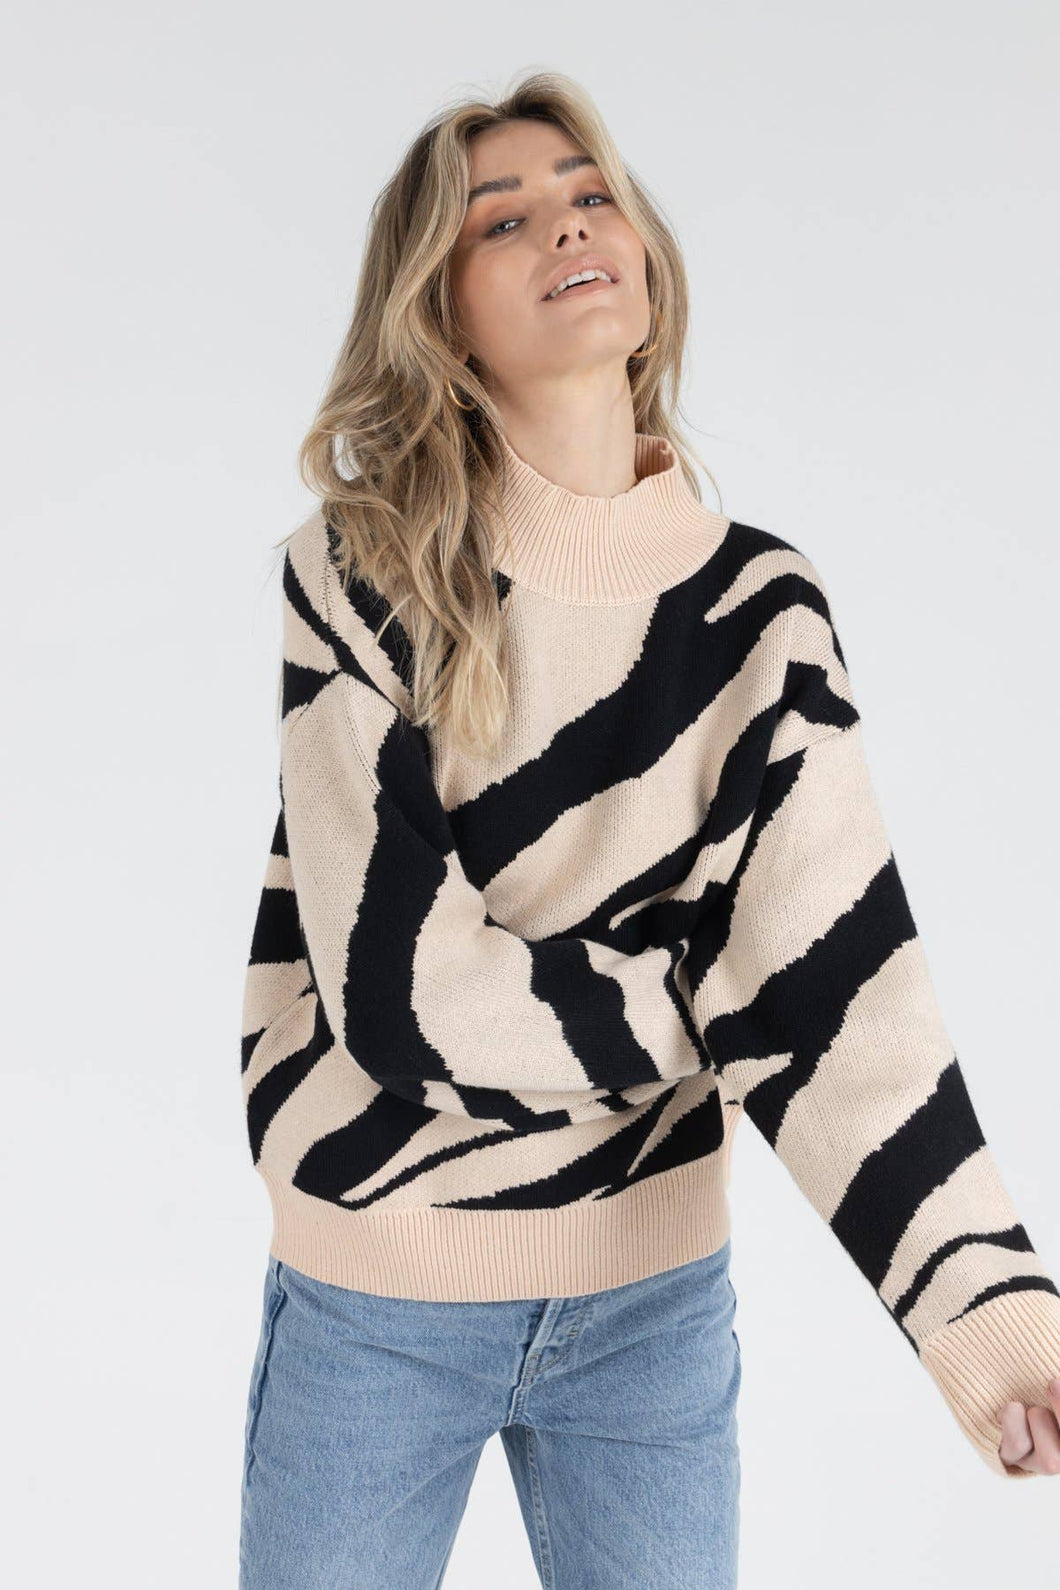 Thinking Out Loud Sweater